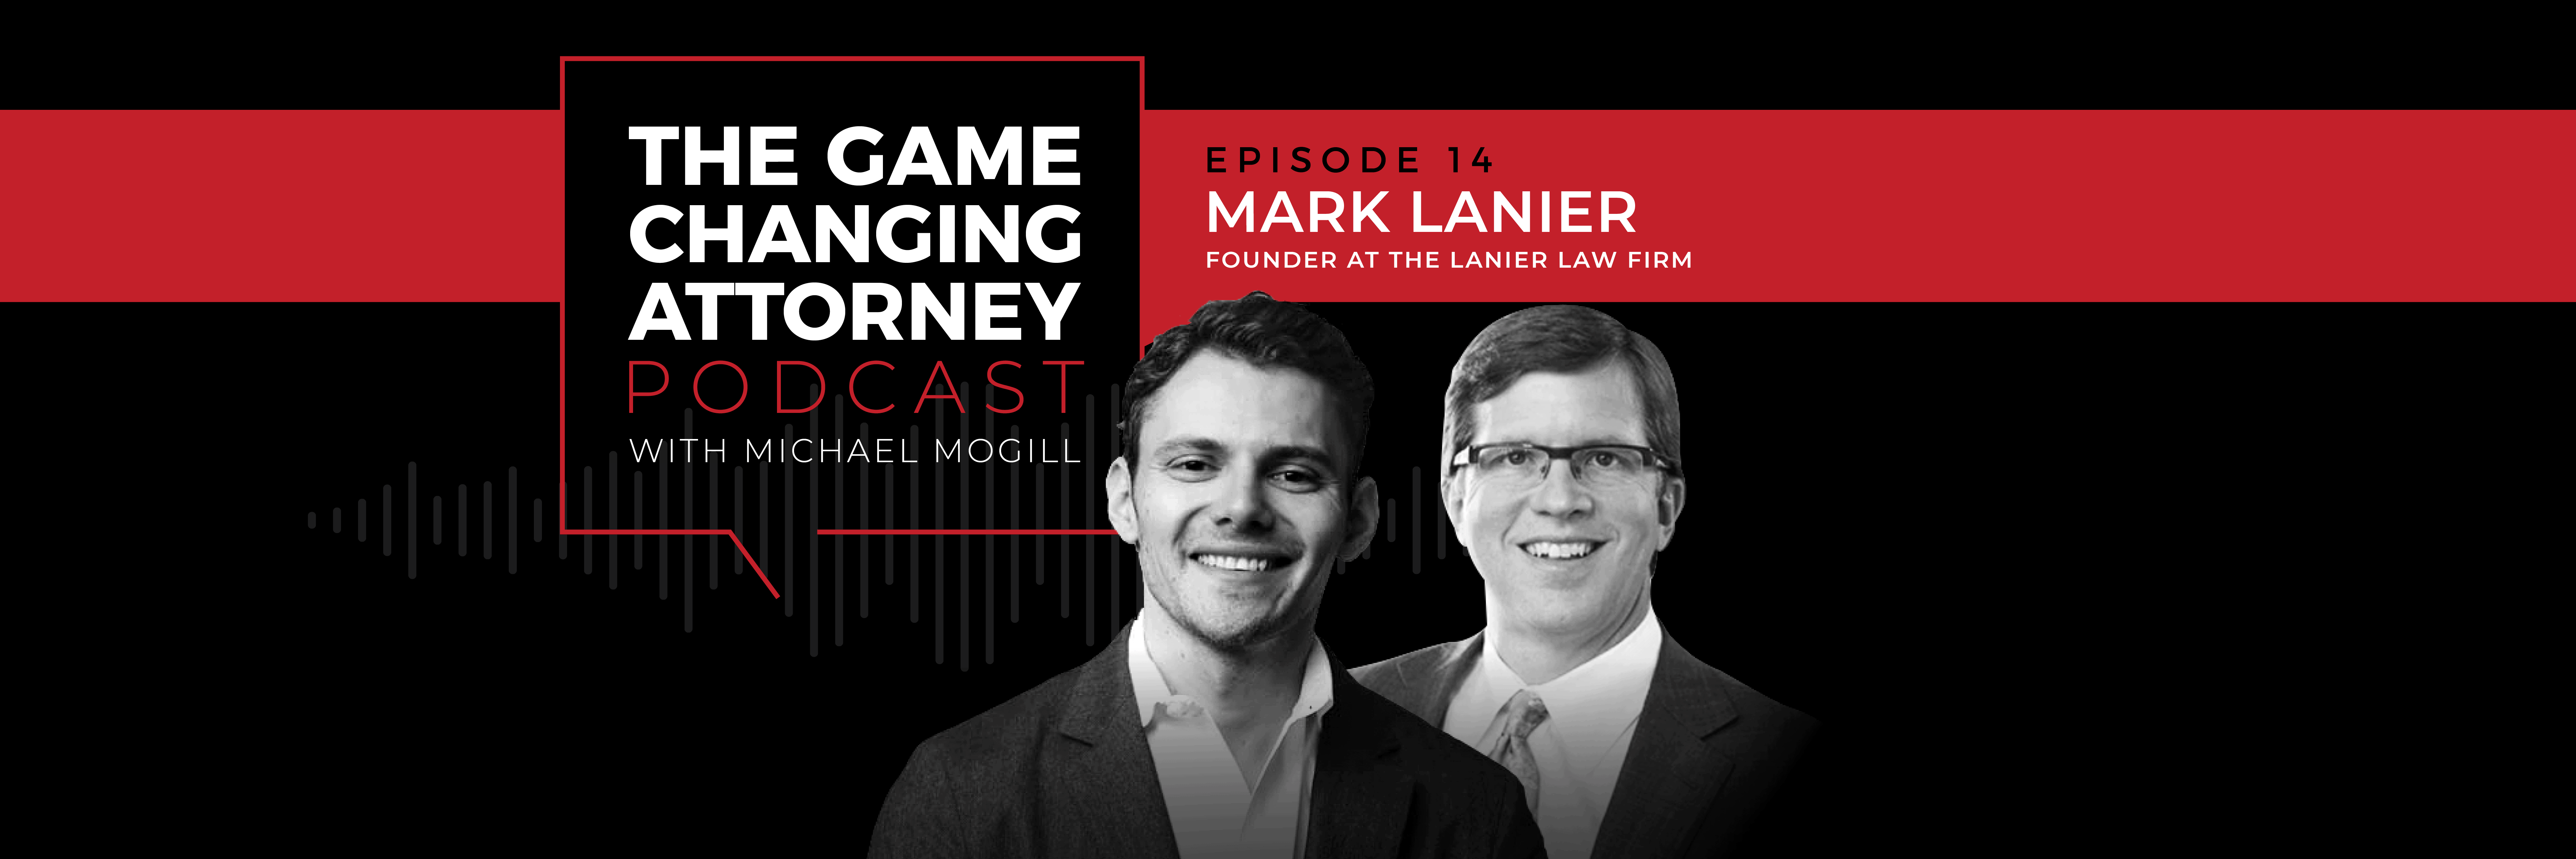 Mark Lanier - The Game Changing Attorney Podcast - Desktop